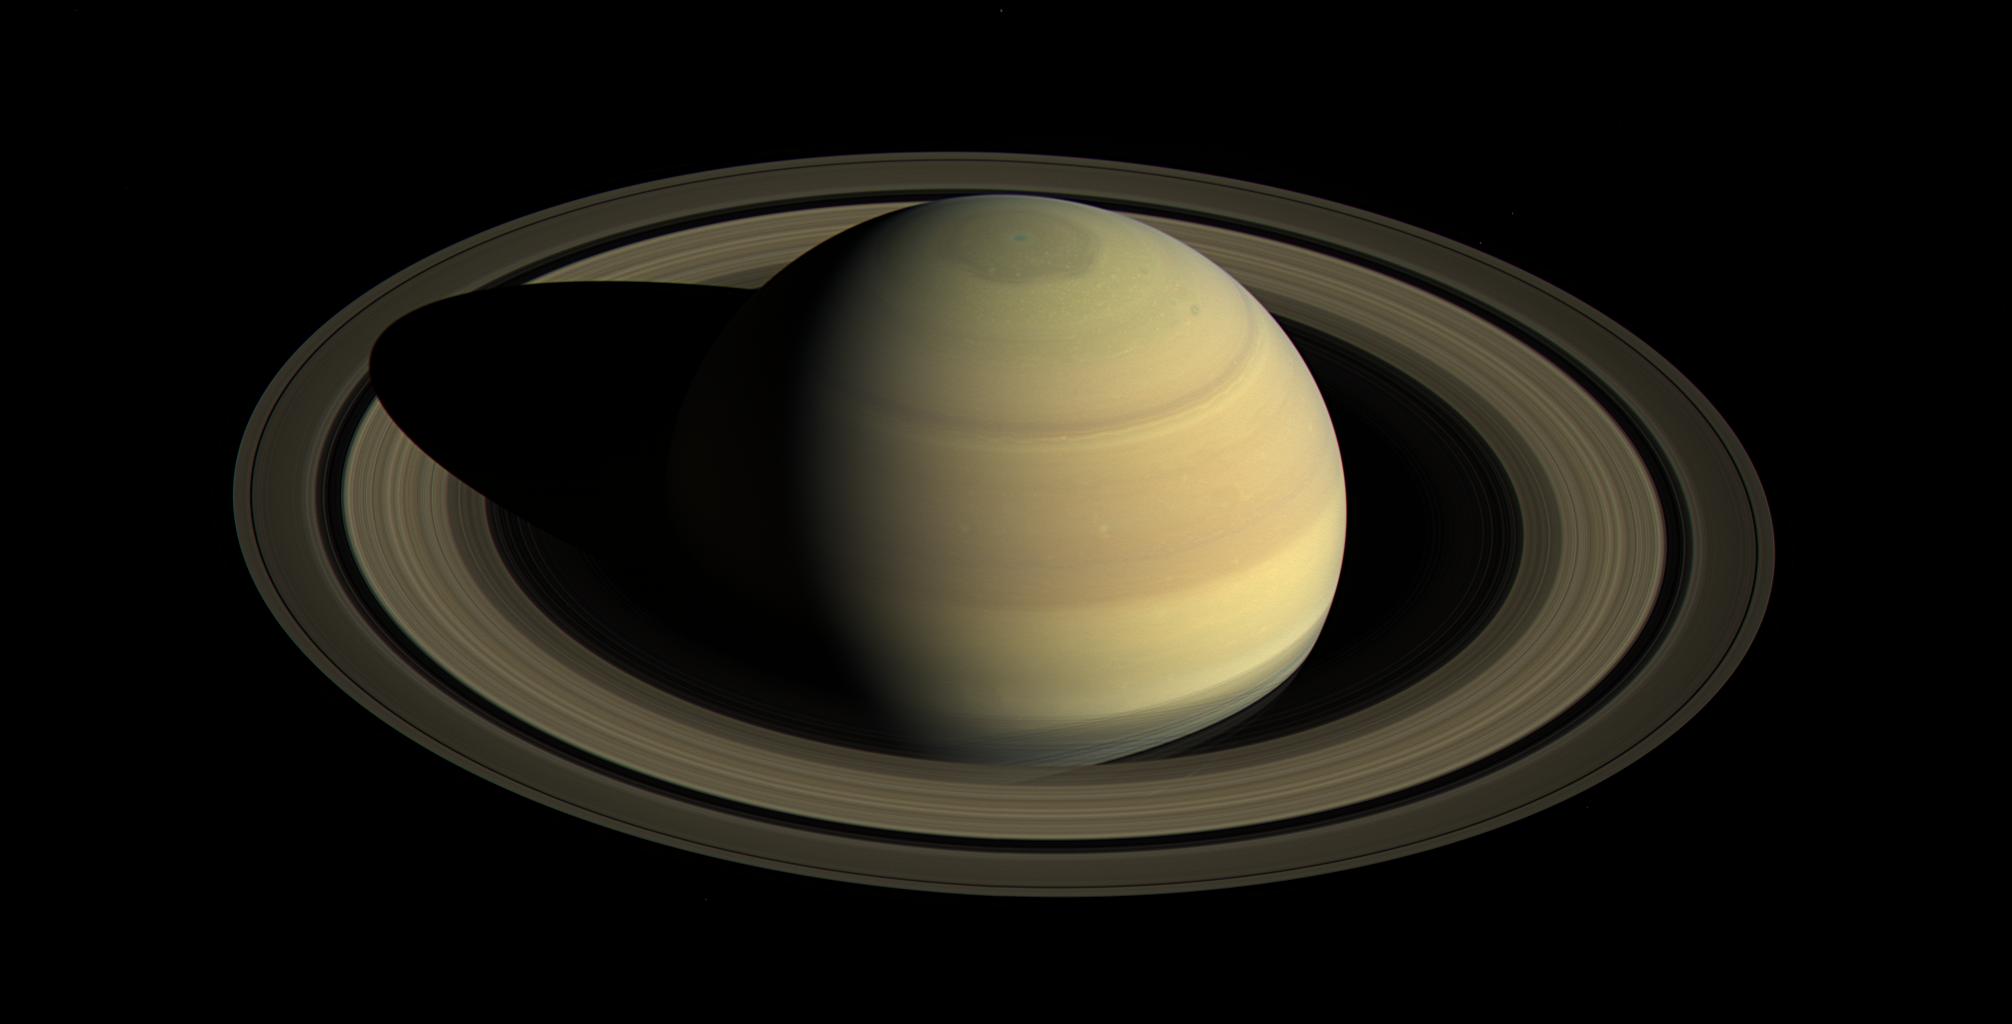 This color view shows all of Saturn with its vast rings extending far into space. The view is from above and the shadow of the planet is visible across the rings.